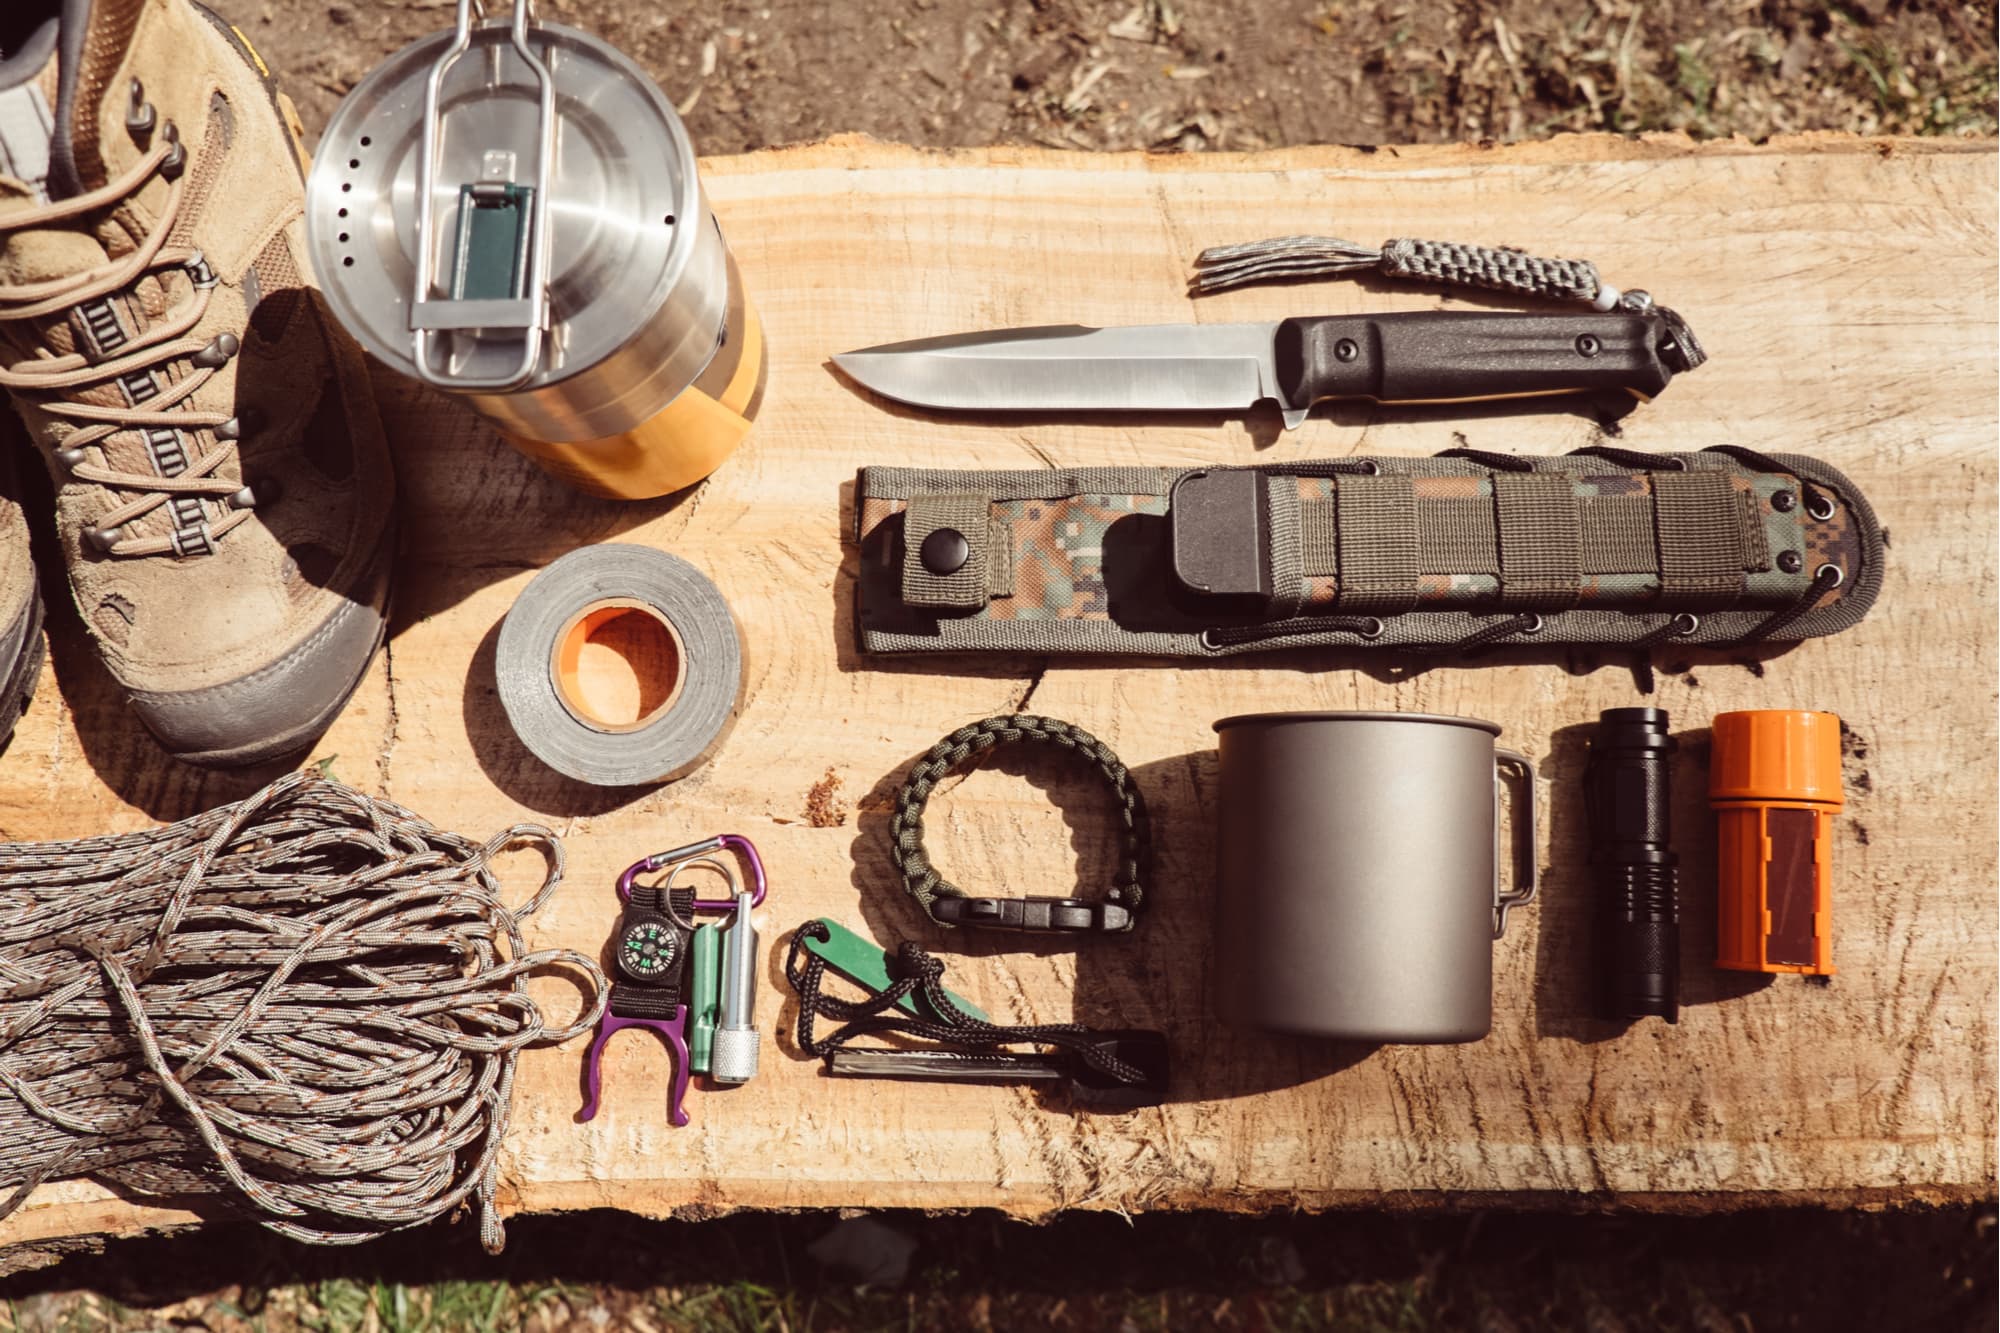 Essential items to include in your outdoor survival pack